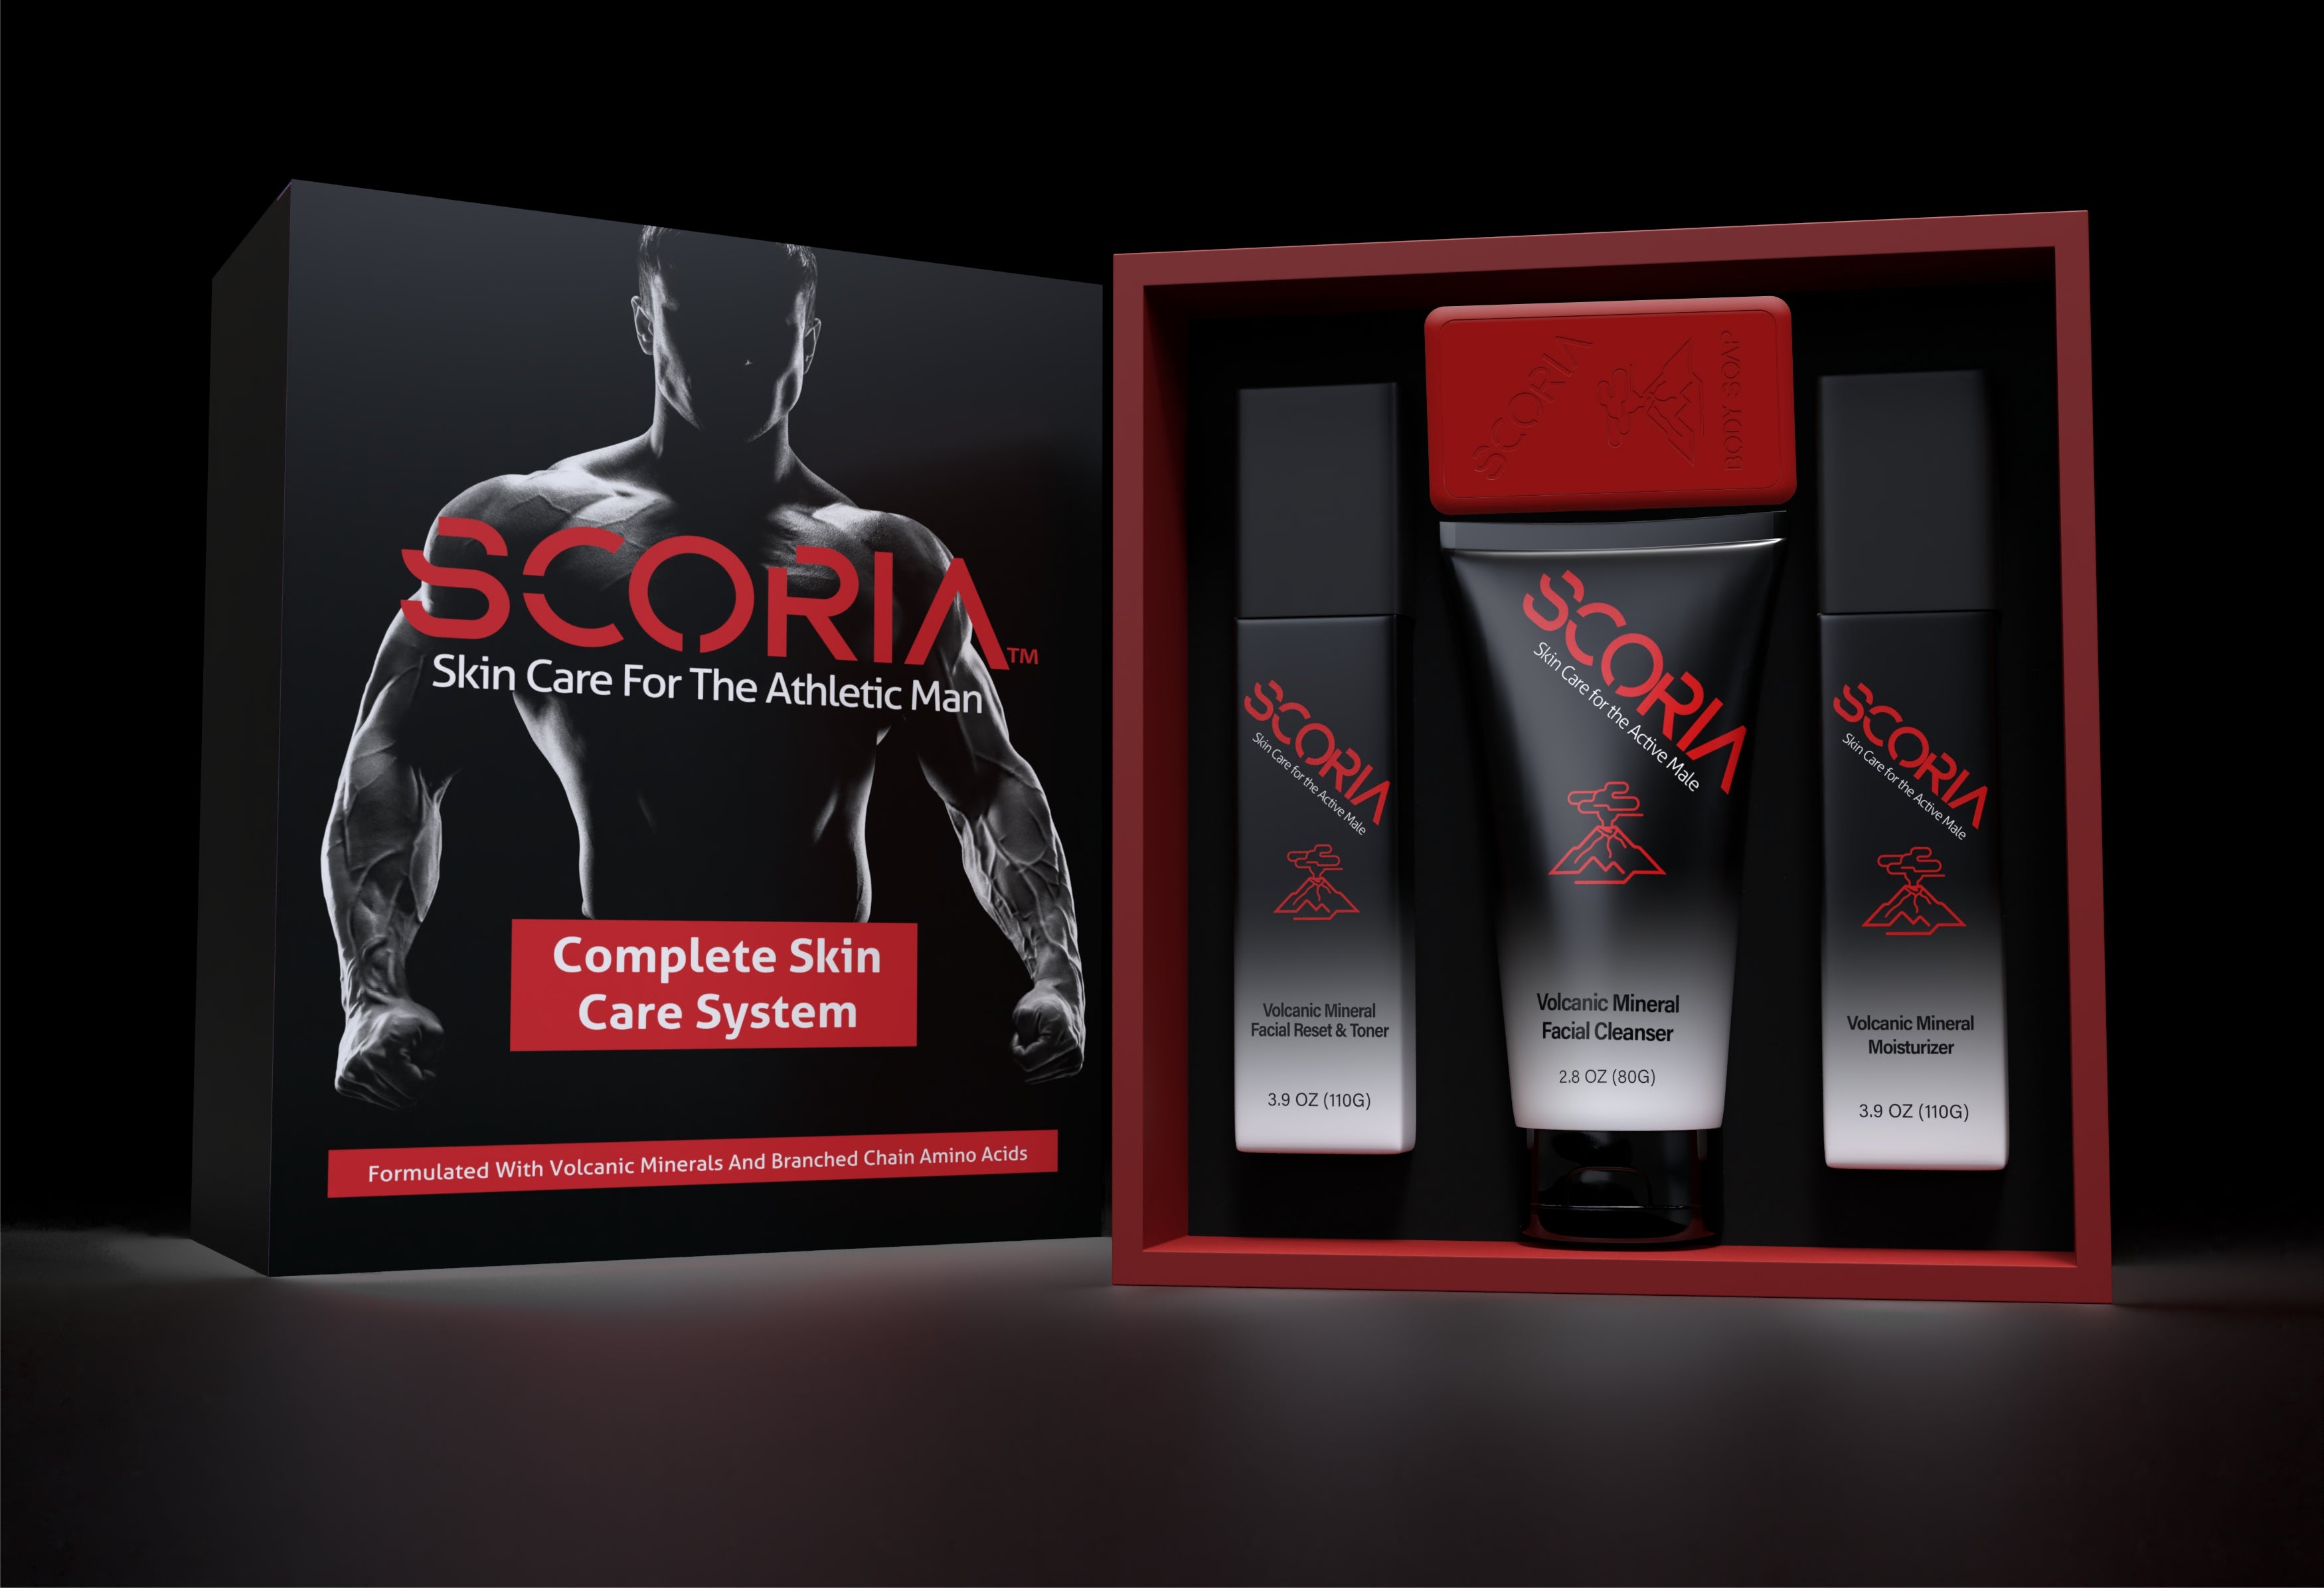 Product Shot. Scoria Skin Care Kit For Men. Contains (1)  2.8 oz Volcanic Mineral Cleanser, (1) 3.9 oz Volcanic Mineral Facial Reset & Toner, (1) 3.9 oz Volcanic Mineral Daily Moisturizer, (1) 5 oz Volcanic Mineral Body Bar Soap.